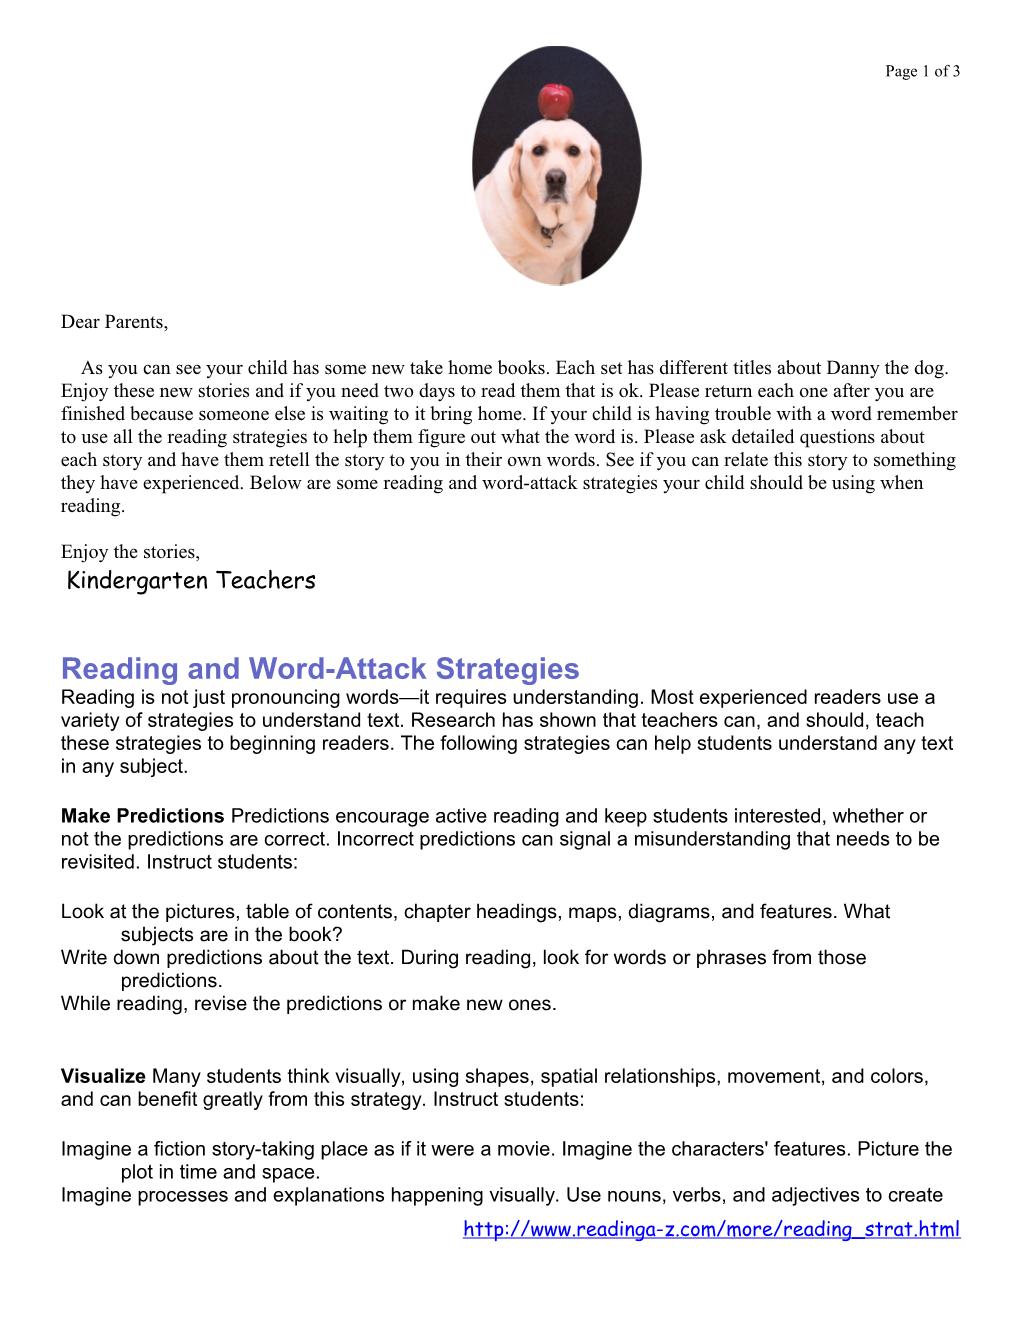 Reading and Word-Attack Strategies